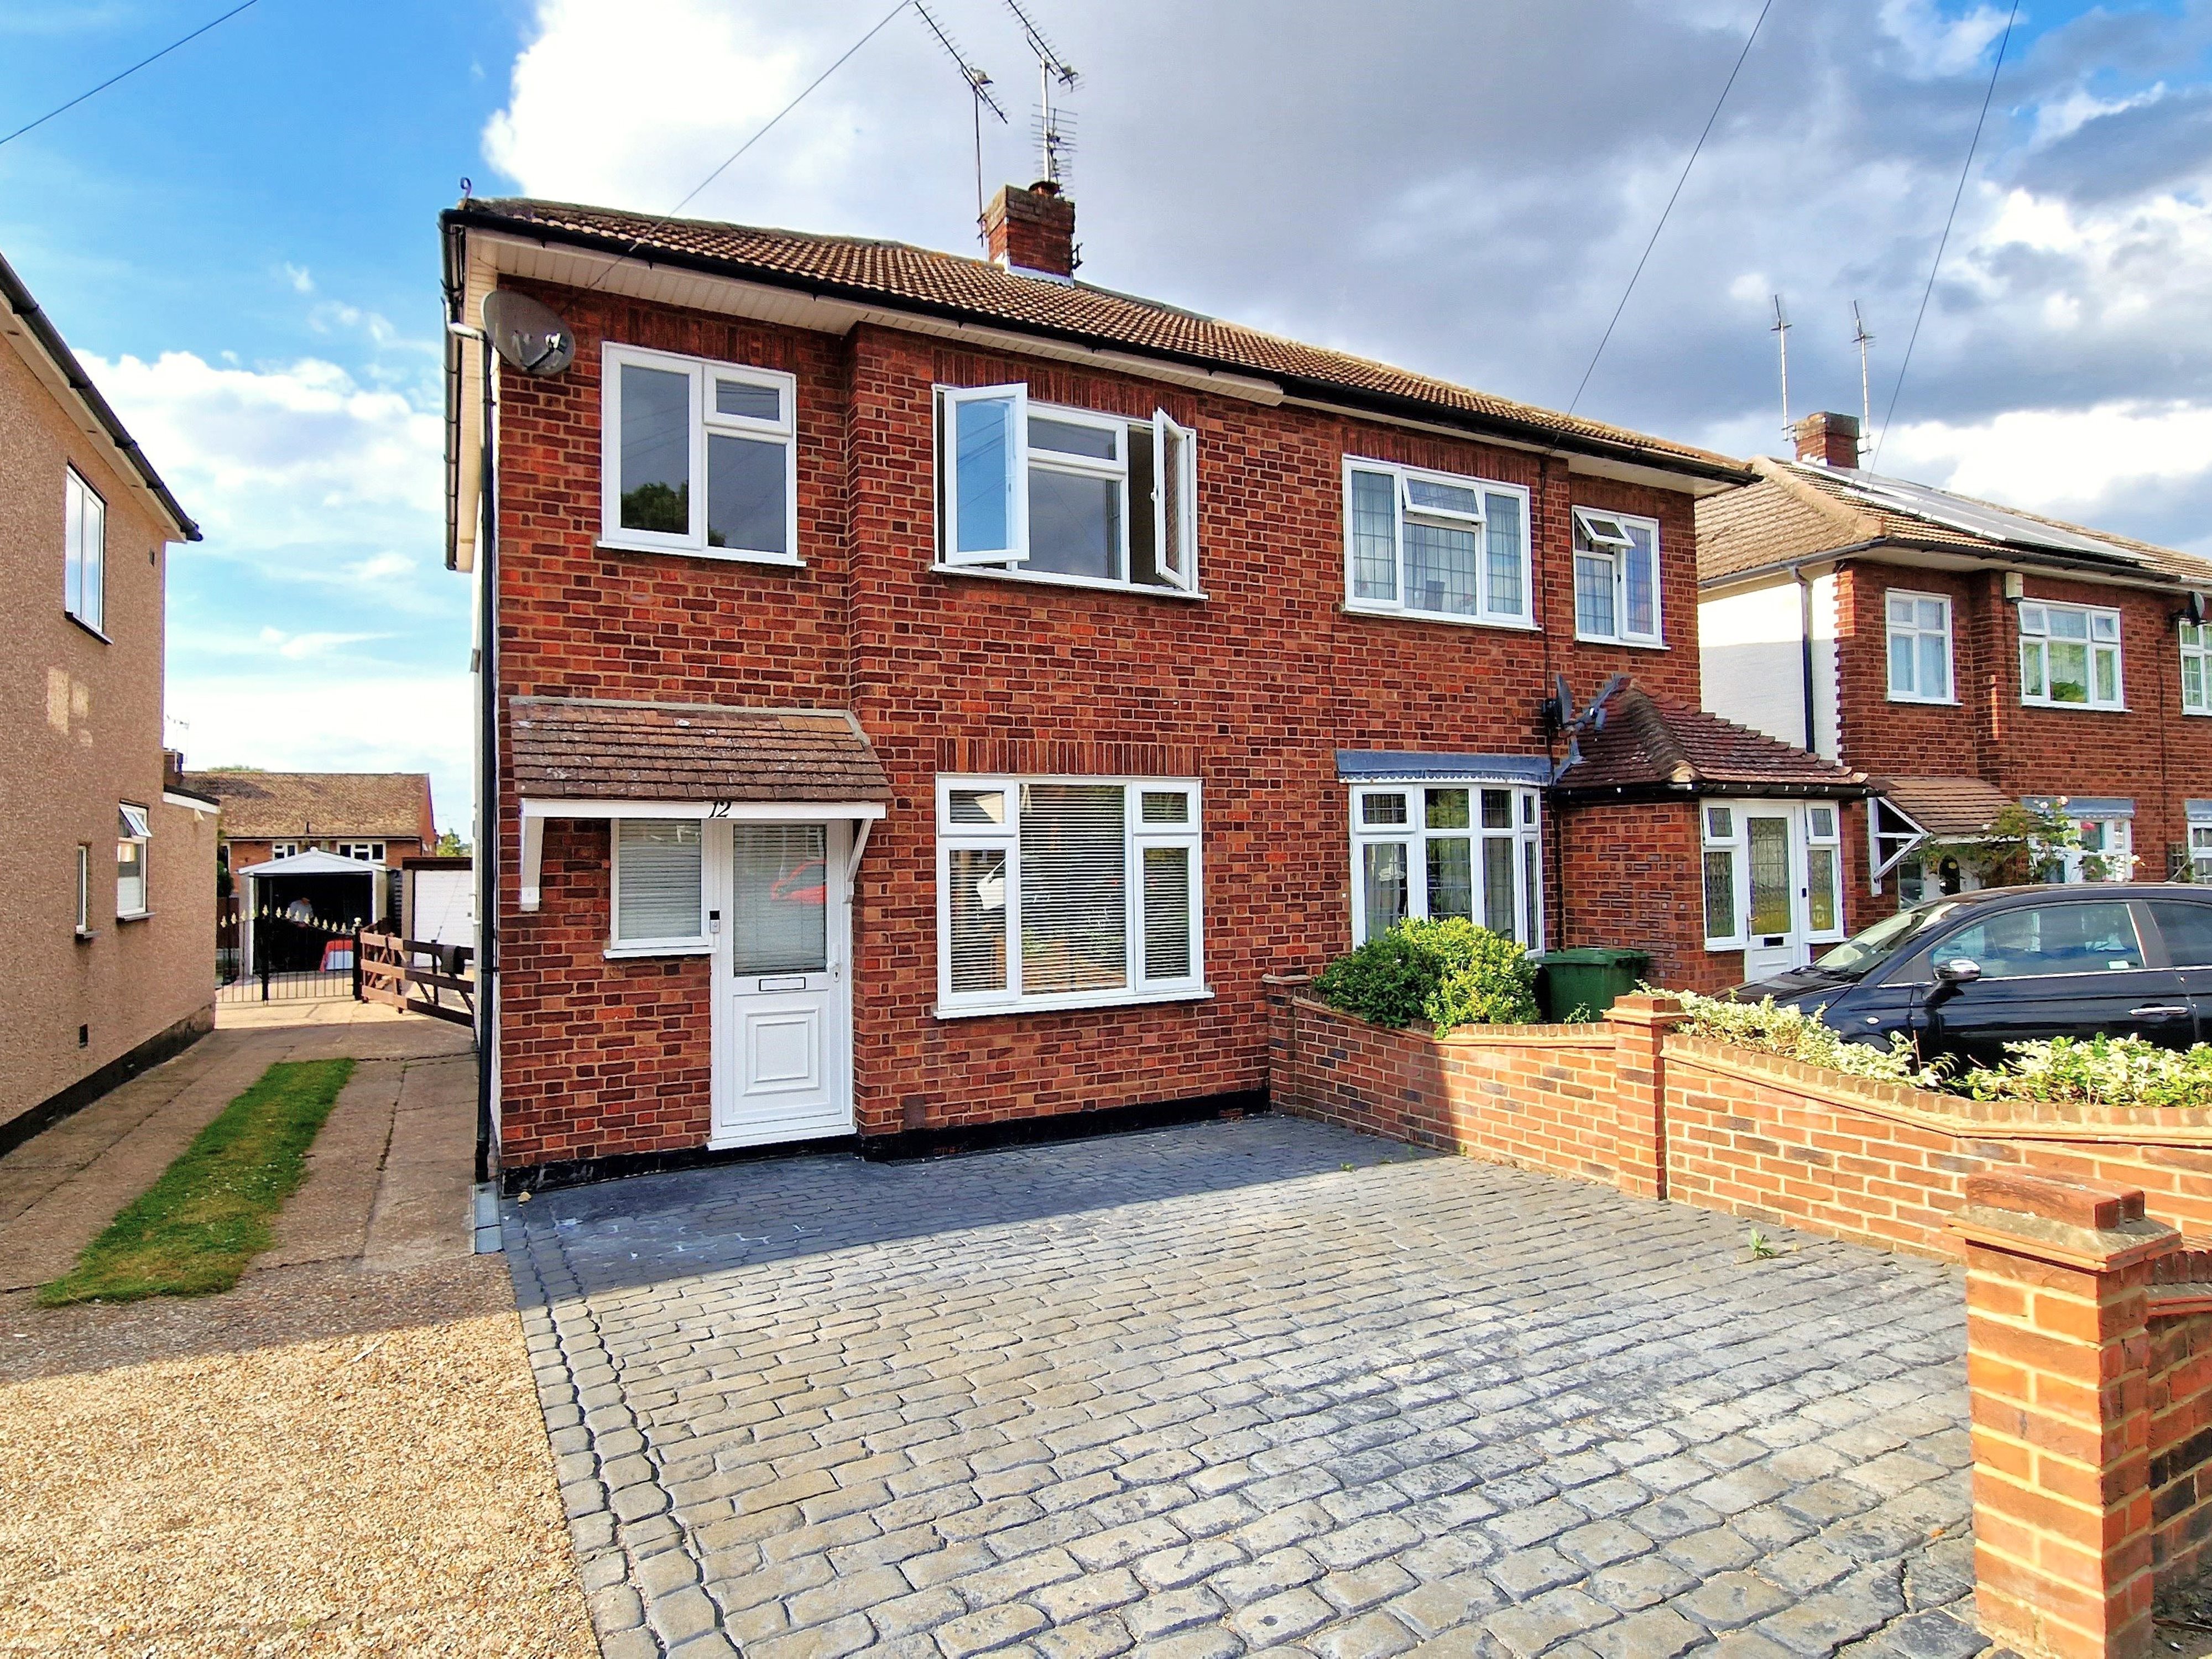 3 bed semi-detached house for sale in Westfield Close, Wickford - Property Image 1